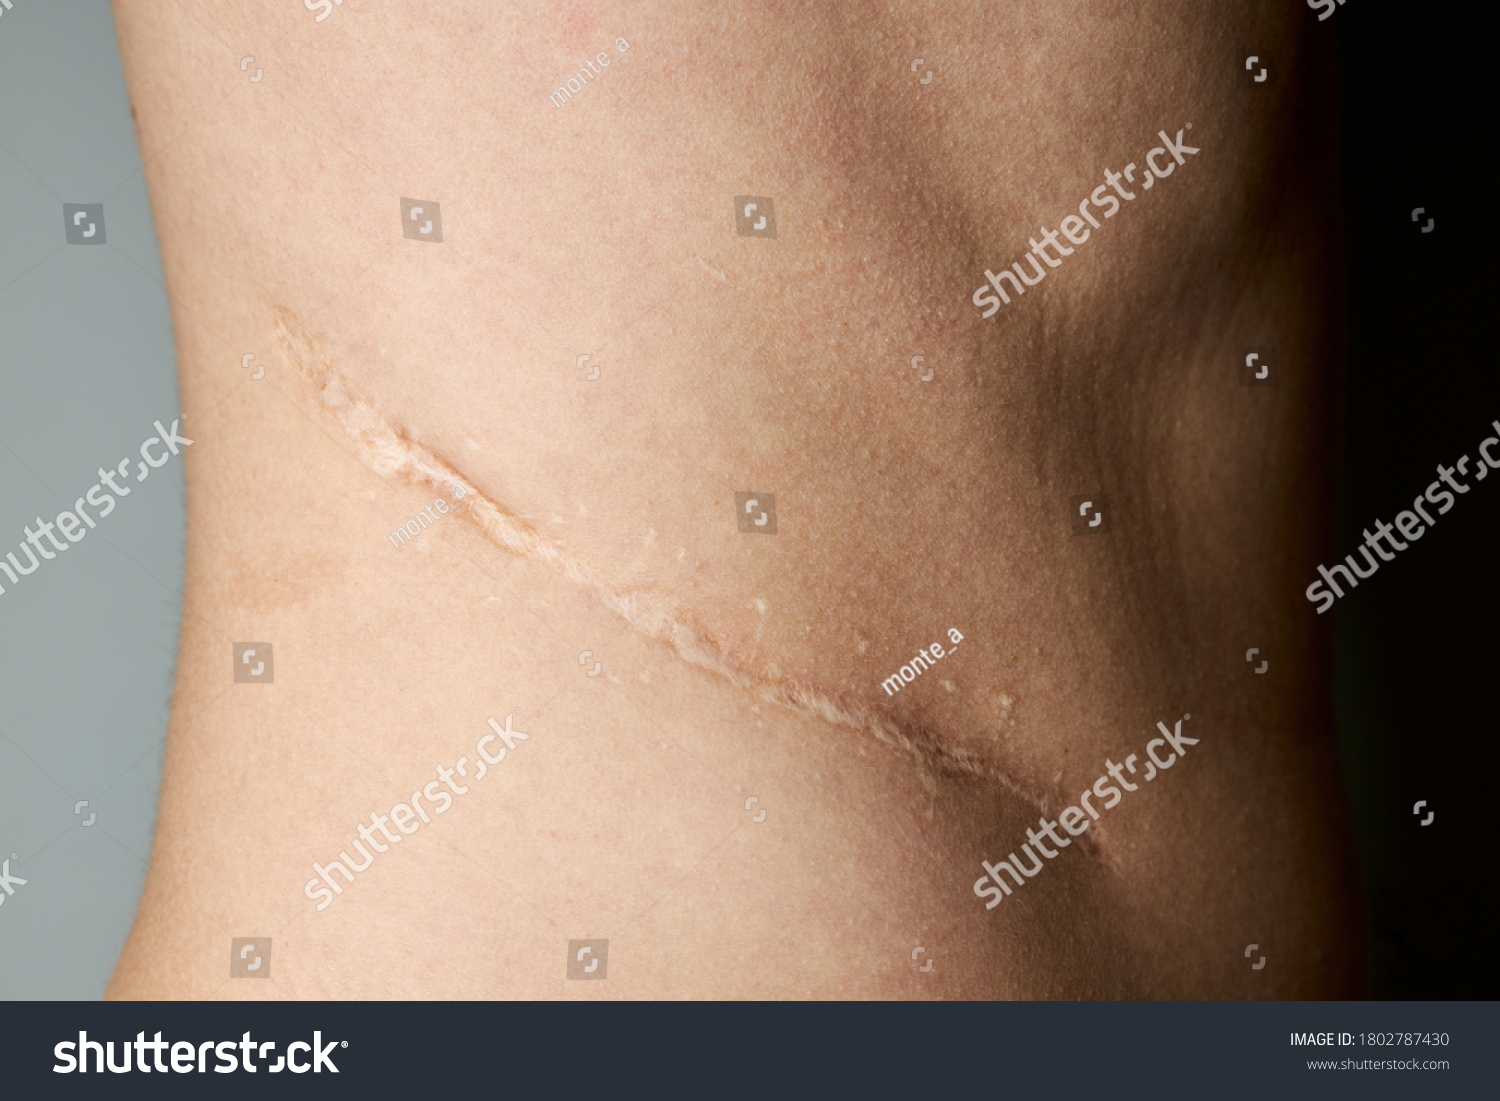 surgery scar after kidney pyelonephritis. after remove kidney operation. caucasian person close up over gray background. #1802787430